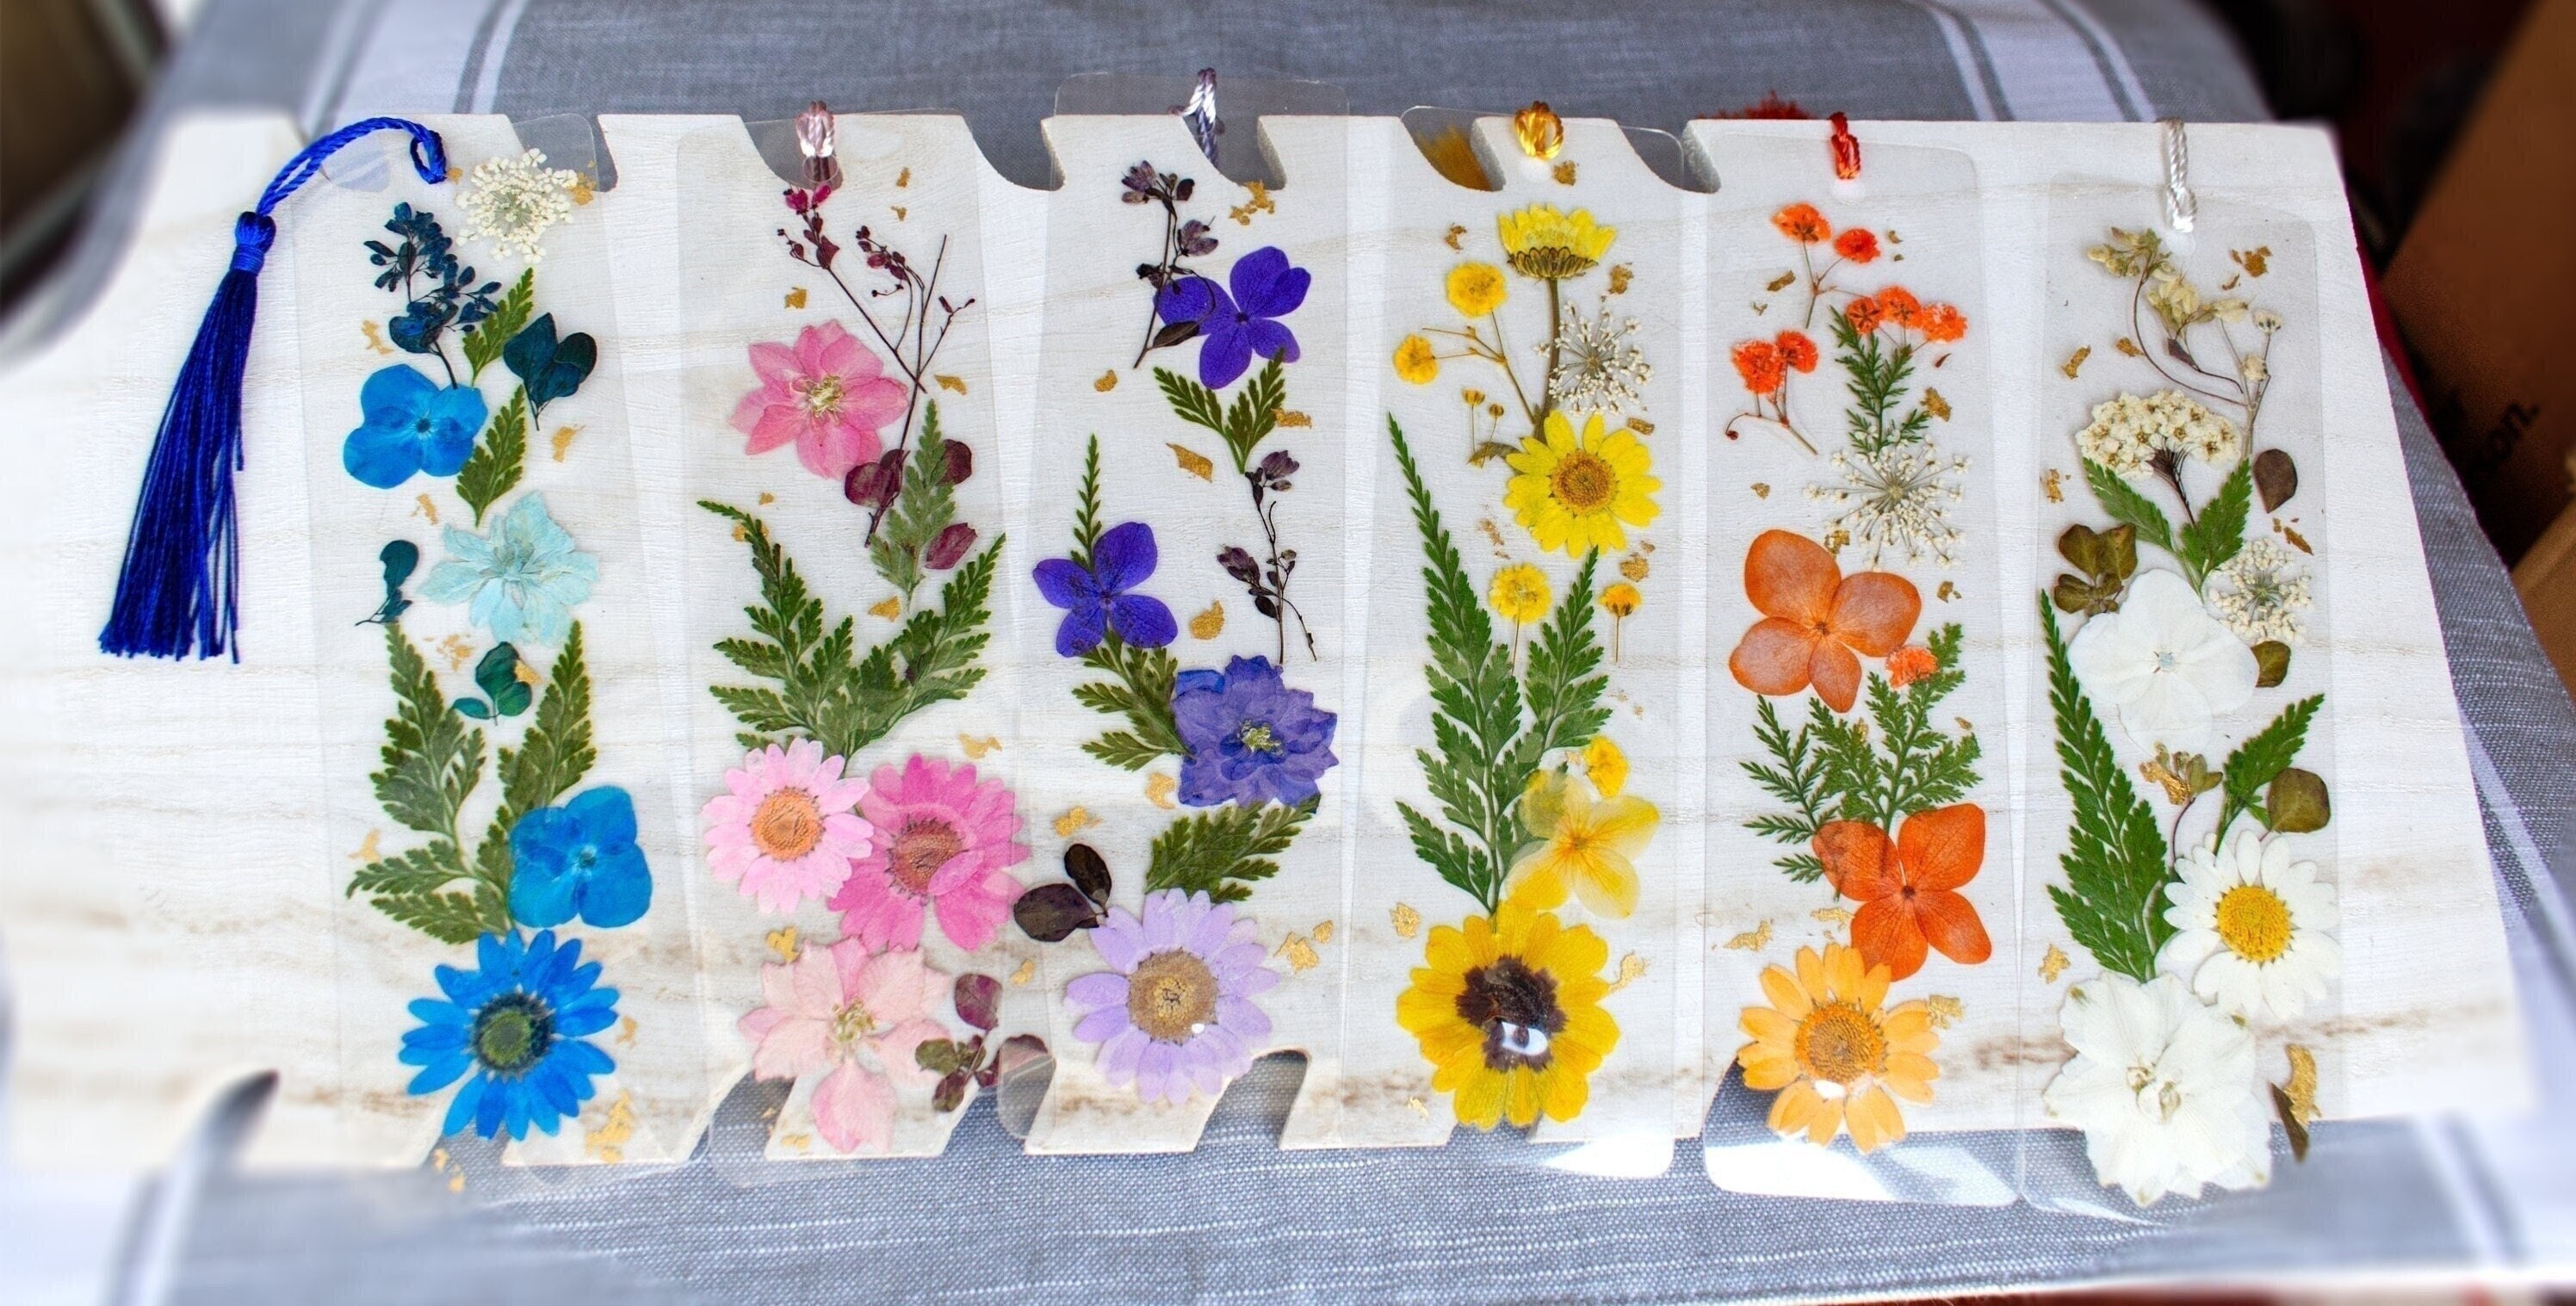  30PCS Transparent Dried Flower Bookmarks, Flower Bookmark  Maker, Handmade DIY Dried Flower Bookmark, Clear Floral Bookmark, Herbarium  Bookmarks Transparent Floral Page : Office Products